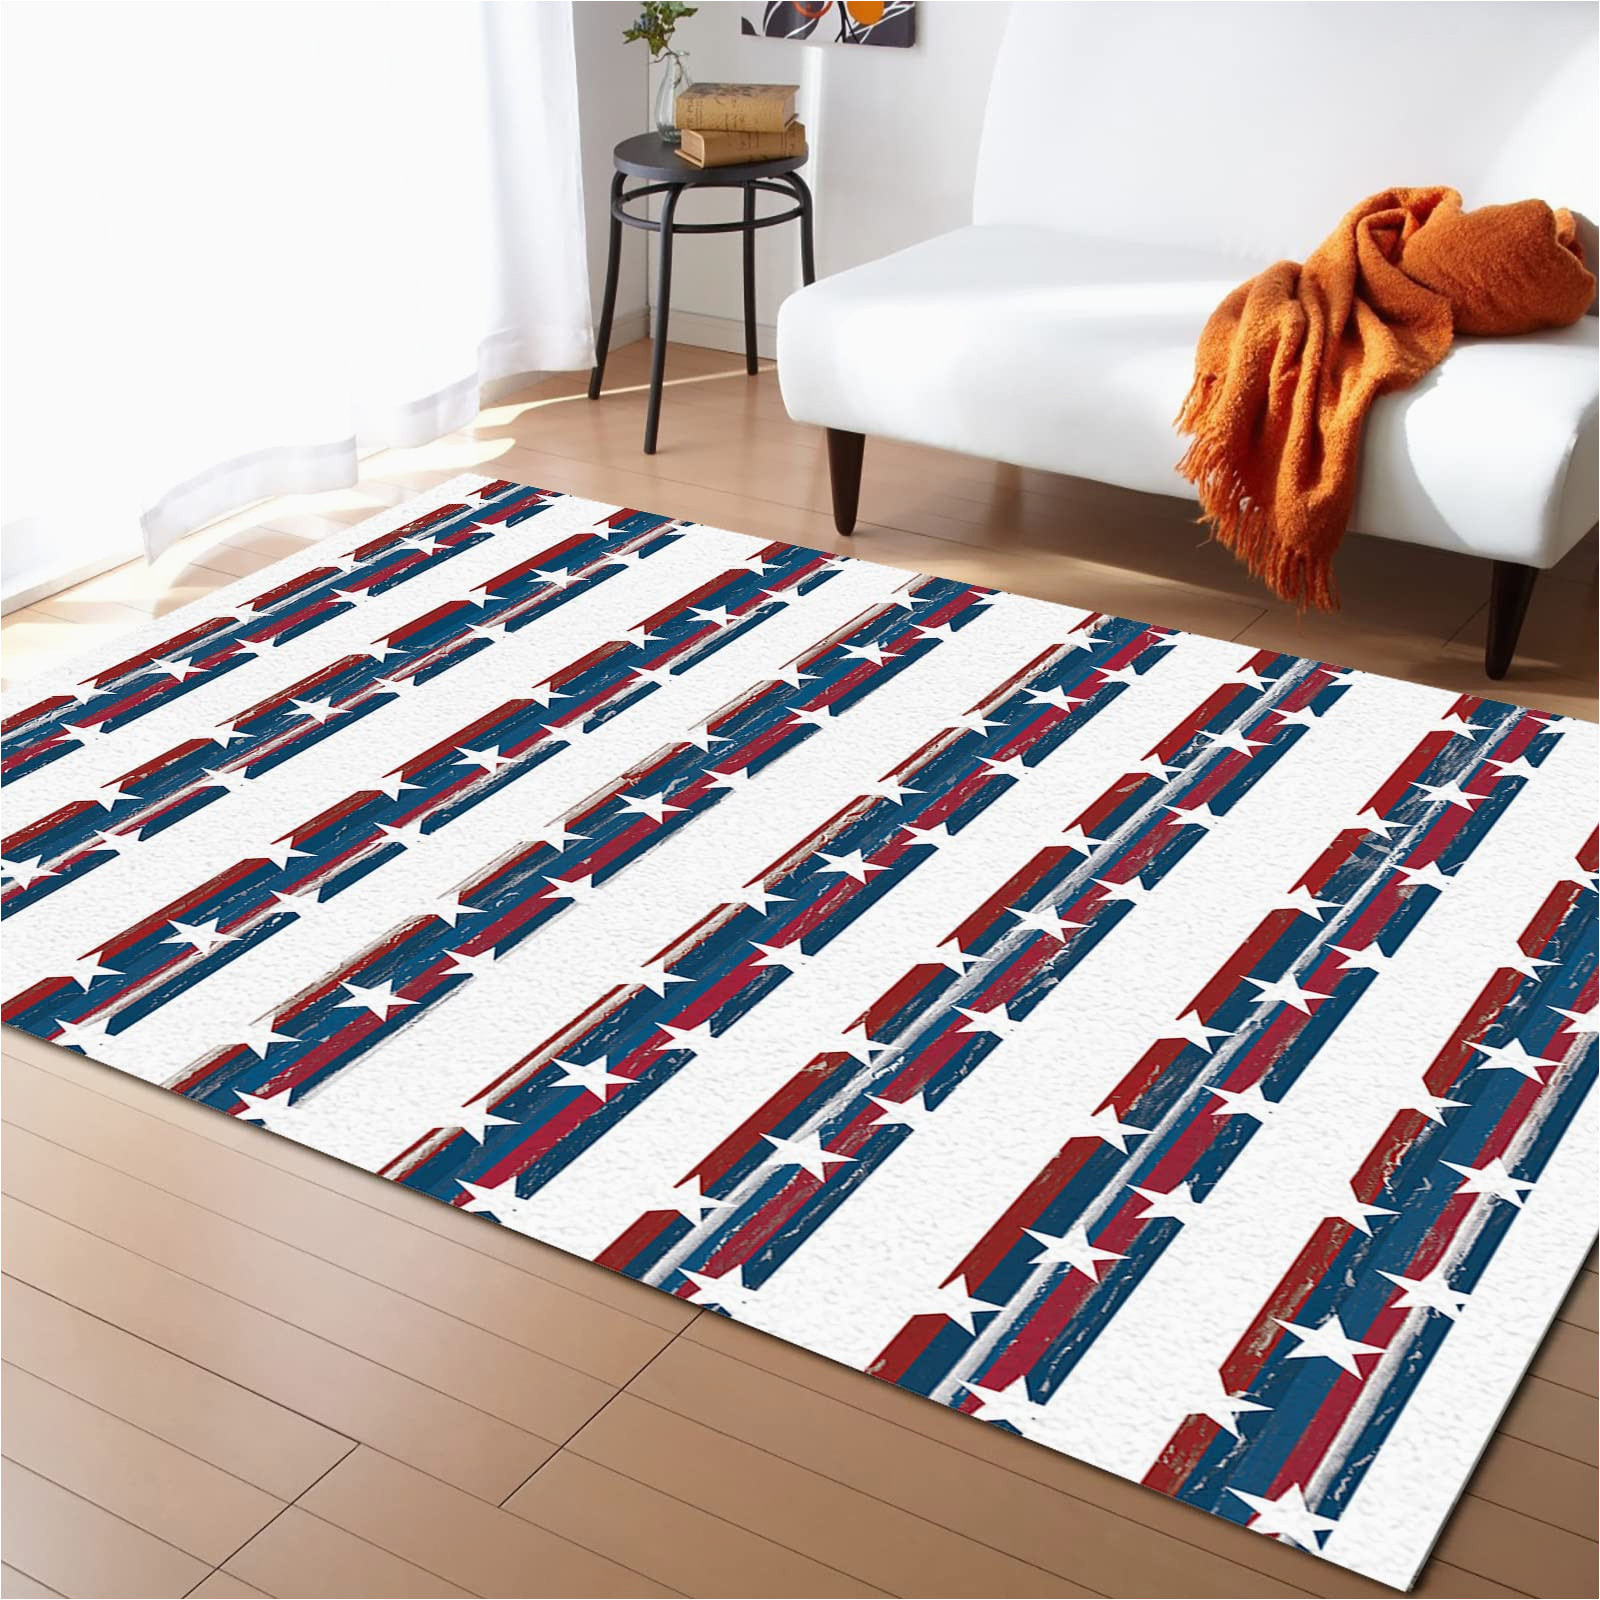 Striped area Rugs 5 X 7 Large Rectangular area Rugs 5′ X 7′ Living Room, 4th Of July Striped Durable Non Slip Rug Carpet Floor Mat for Bedroom Bedside Outdoor Independence …